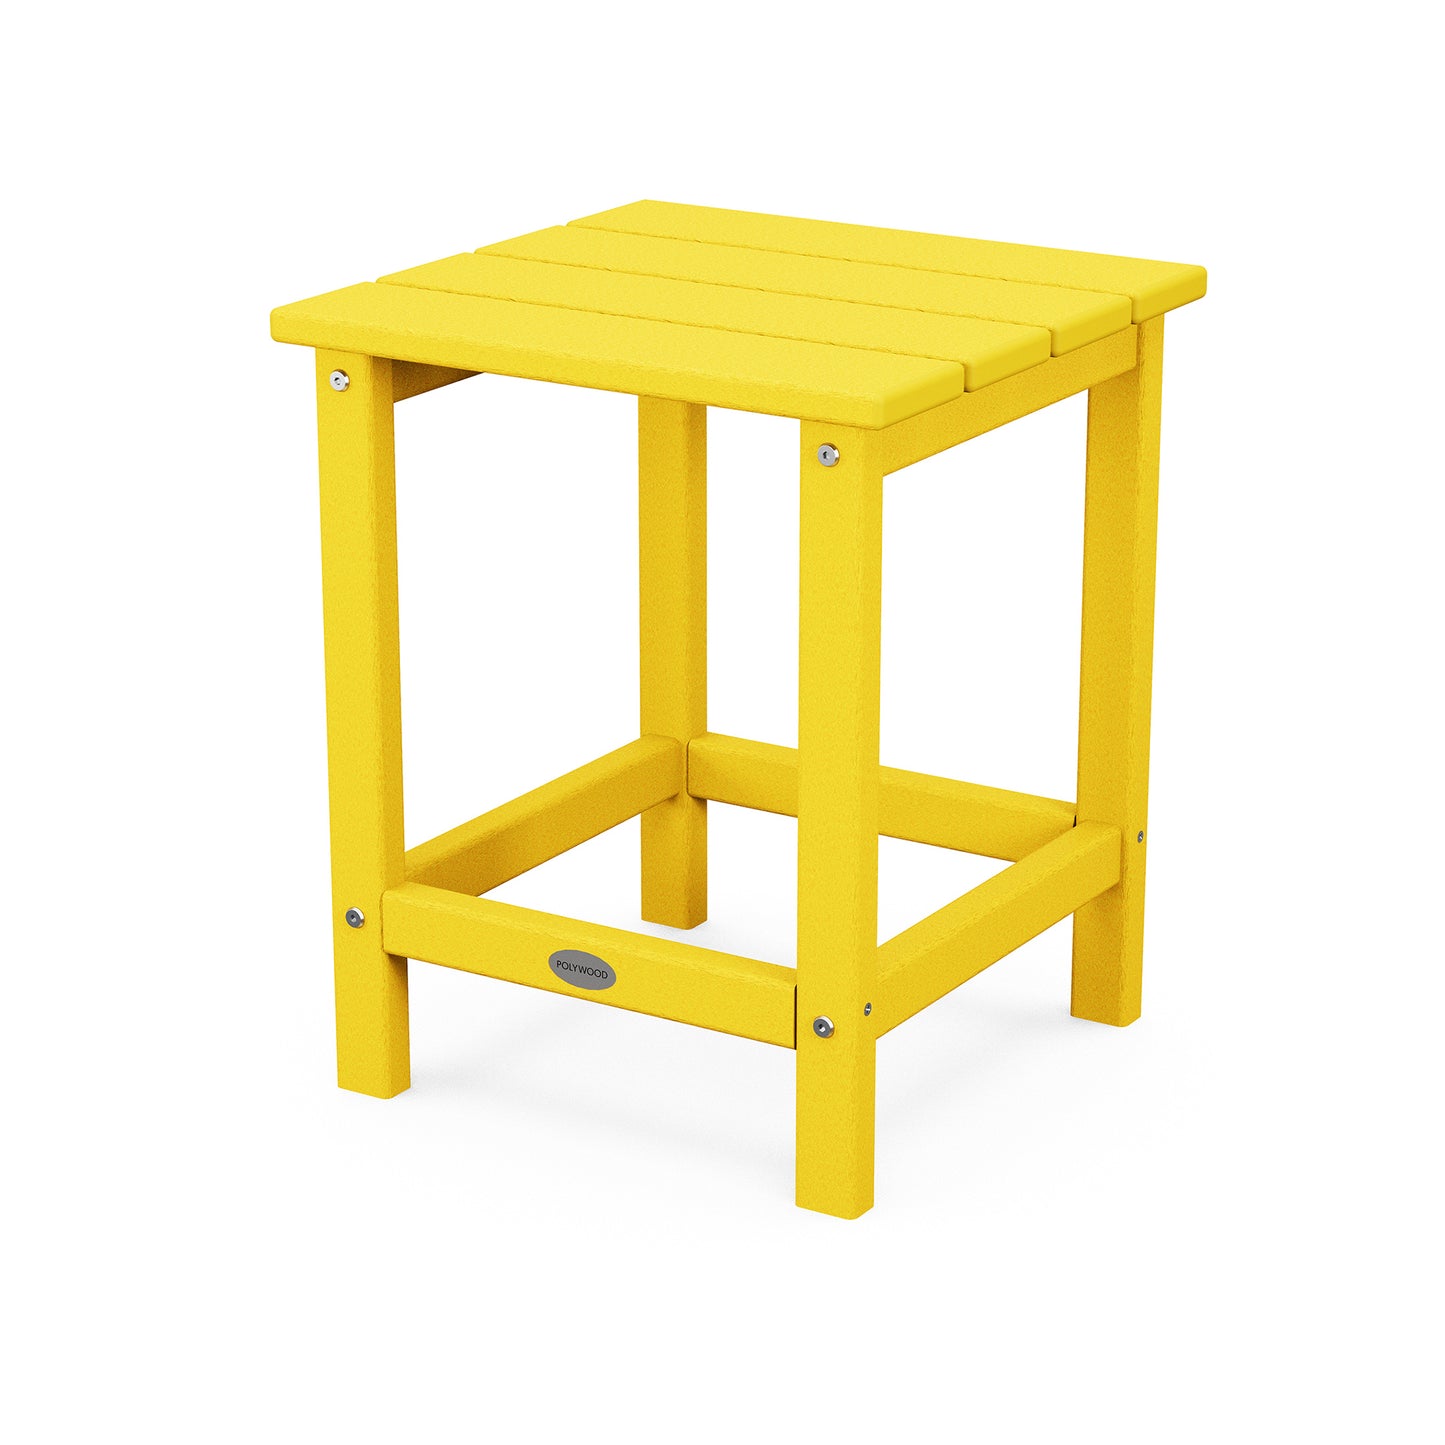 A bright yellow POLYWOOD® Long Island 18" side table with a rectangular top and a lower shelf, isolated on a white background.